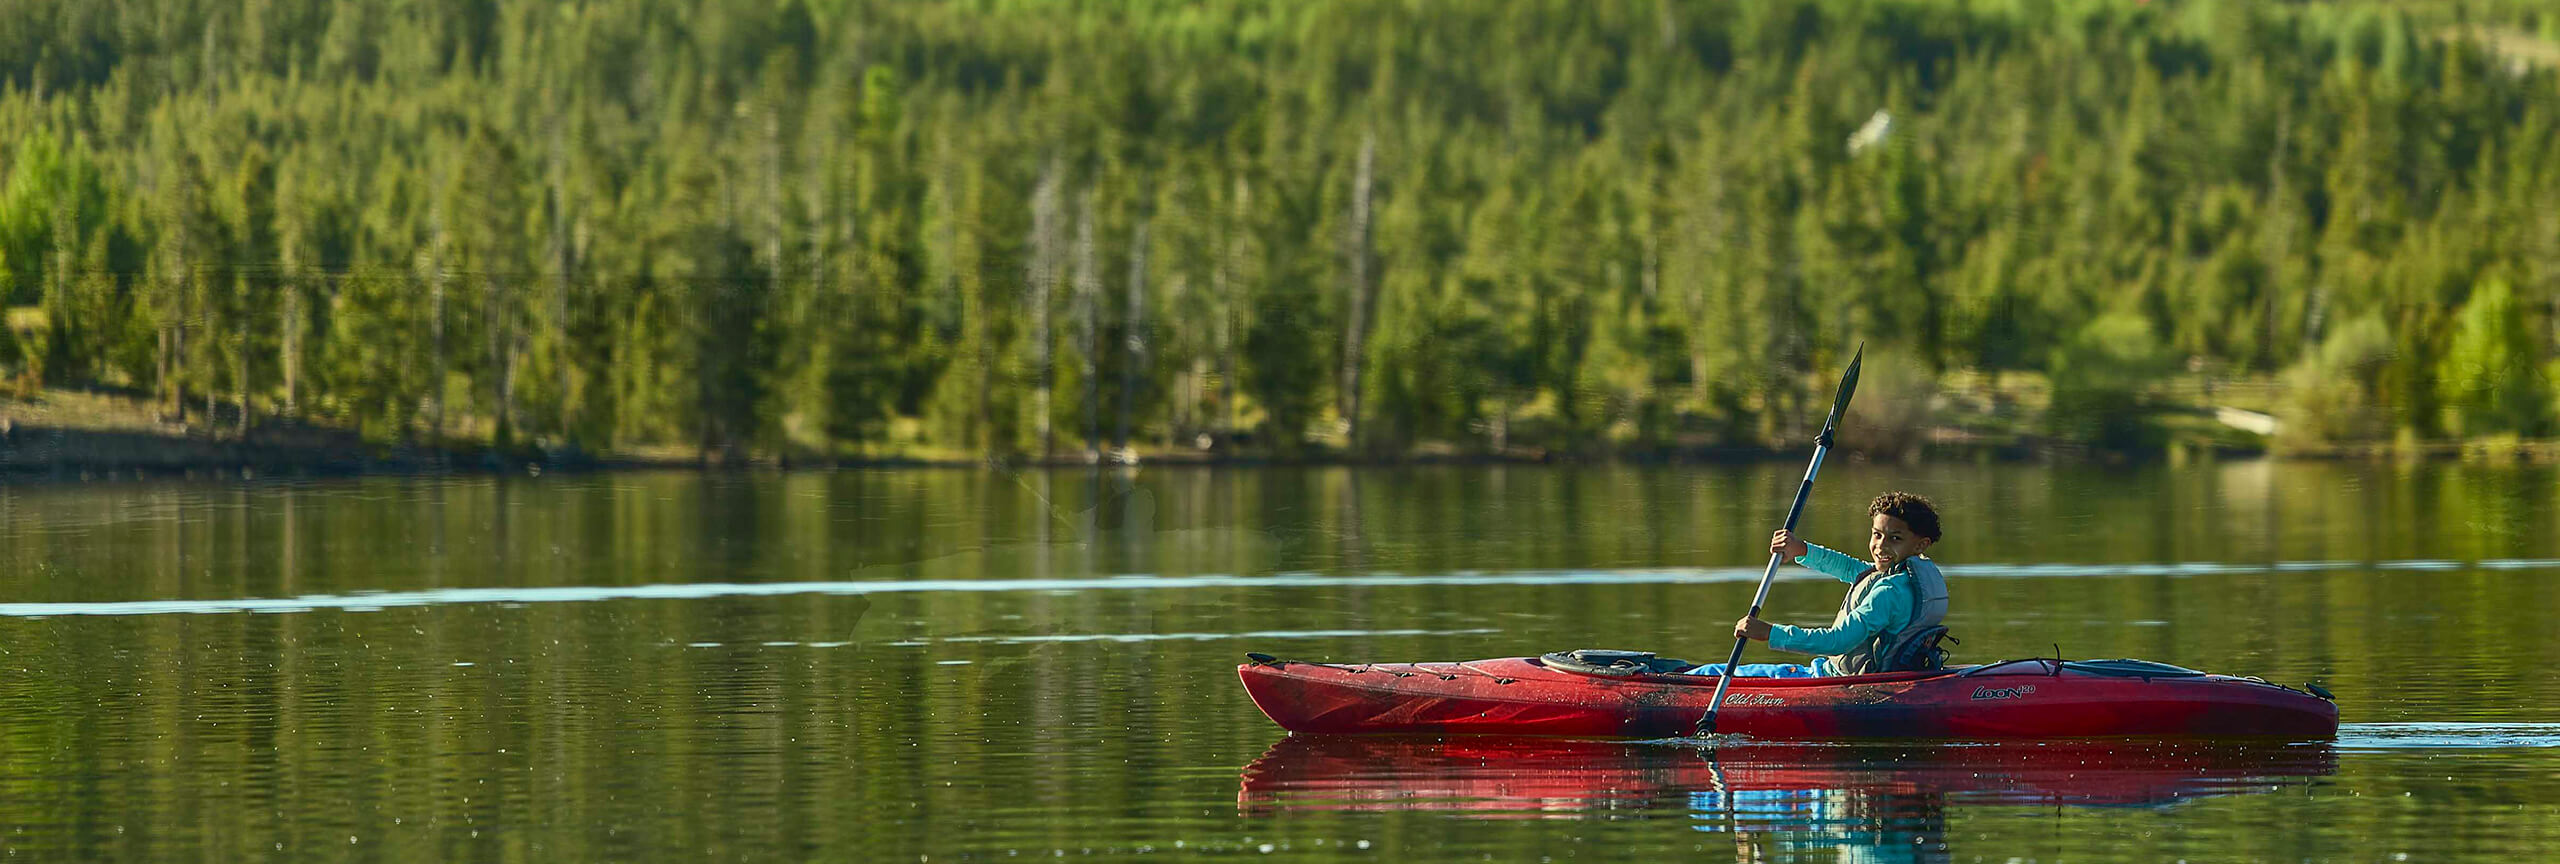 Kayaker on calm water with trees in background